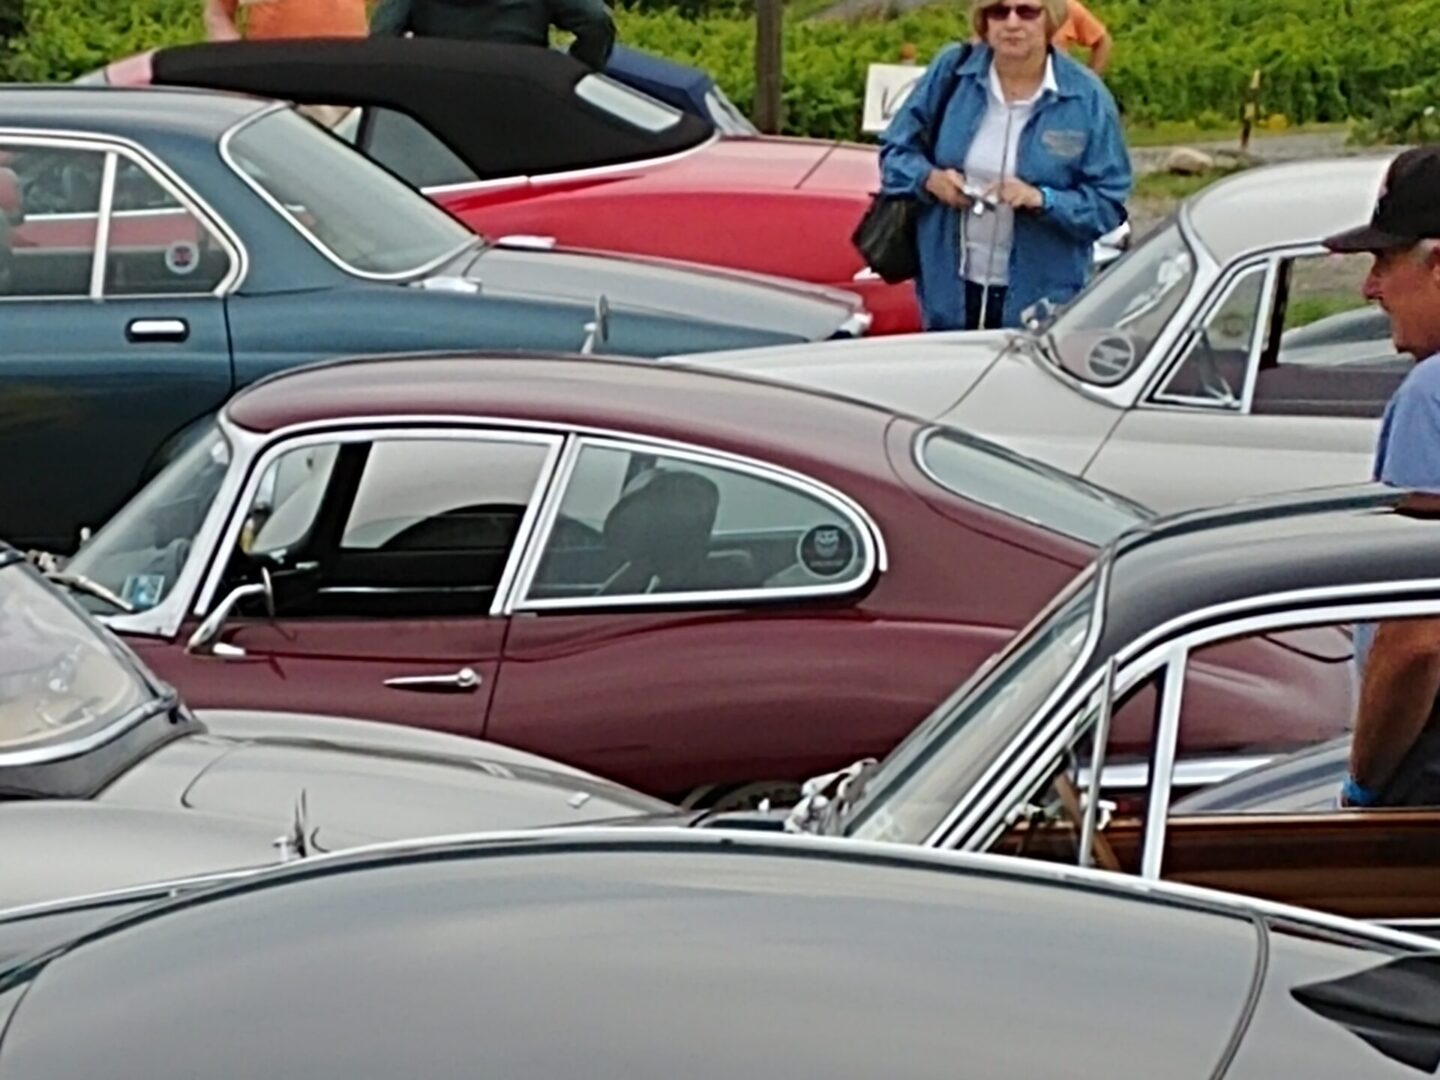 A woman standing in front of many parked cars.